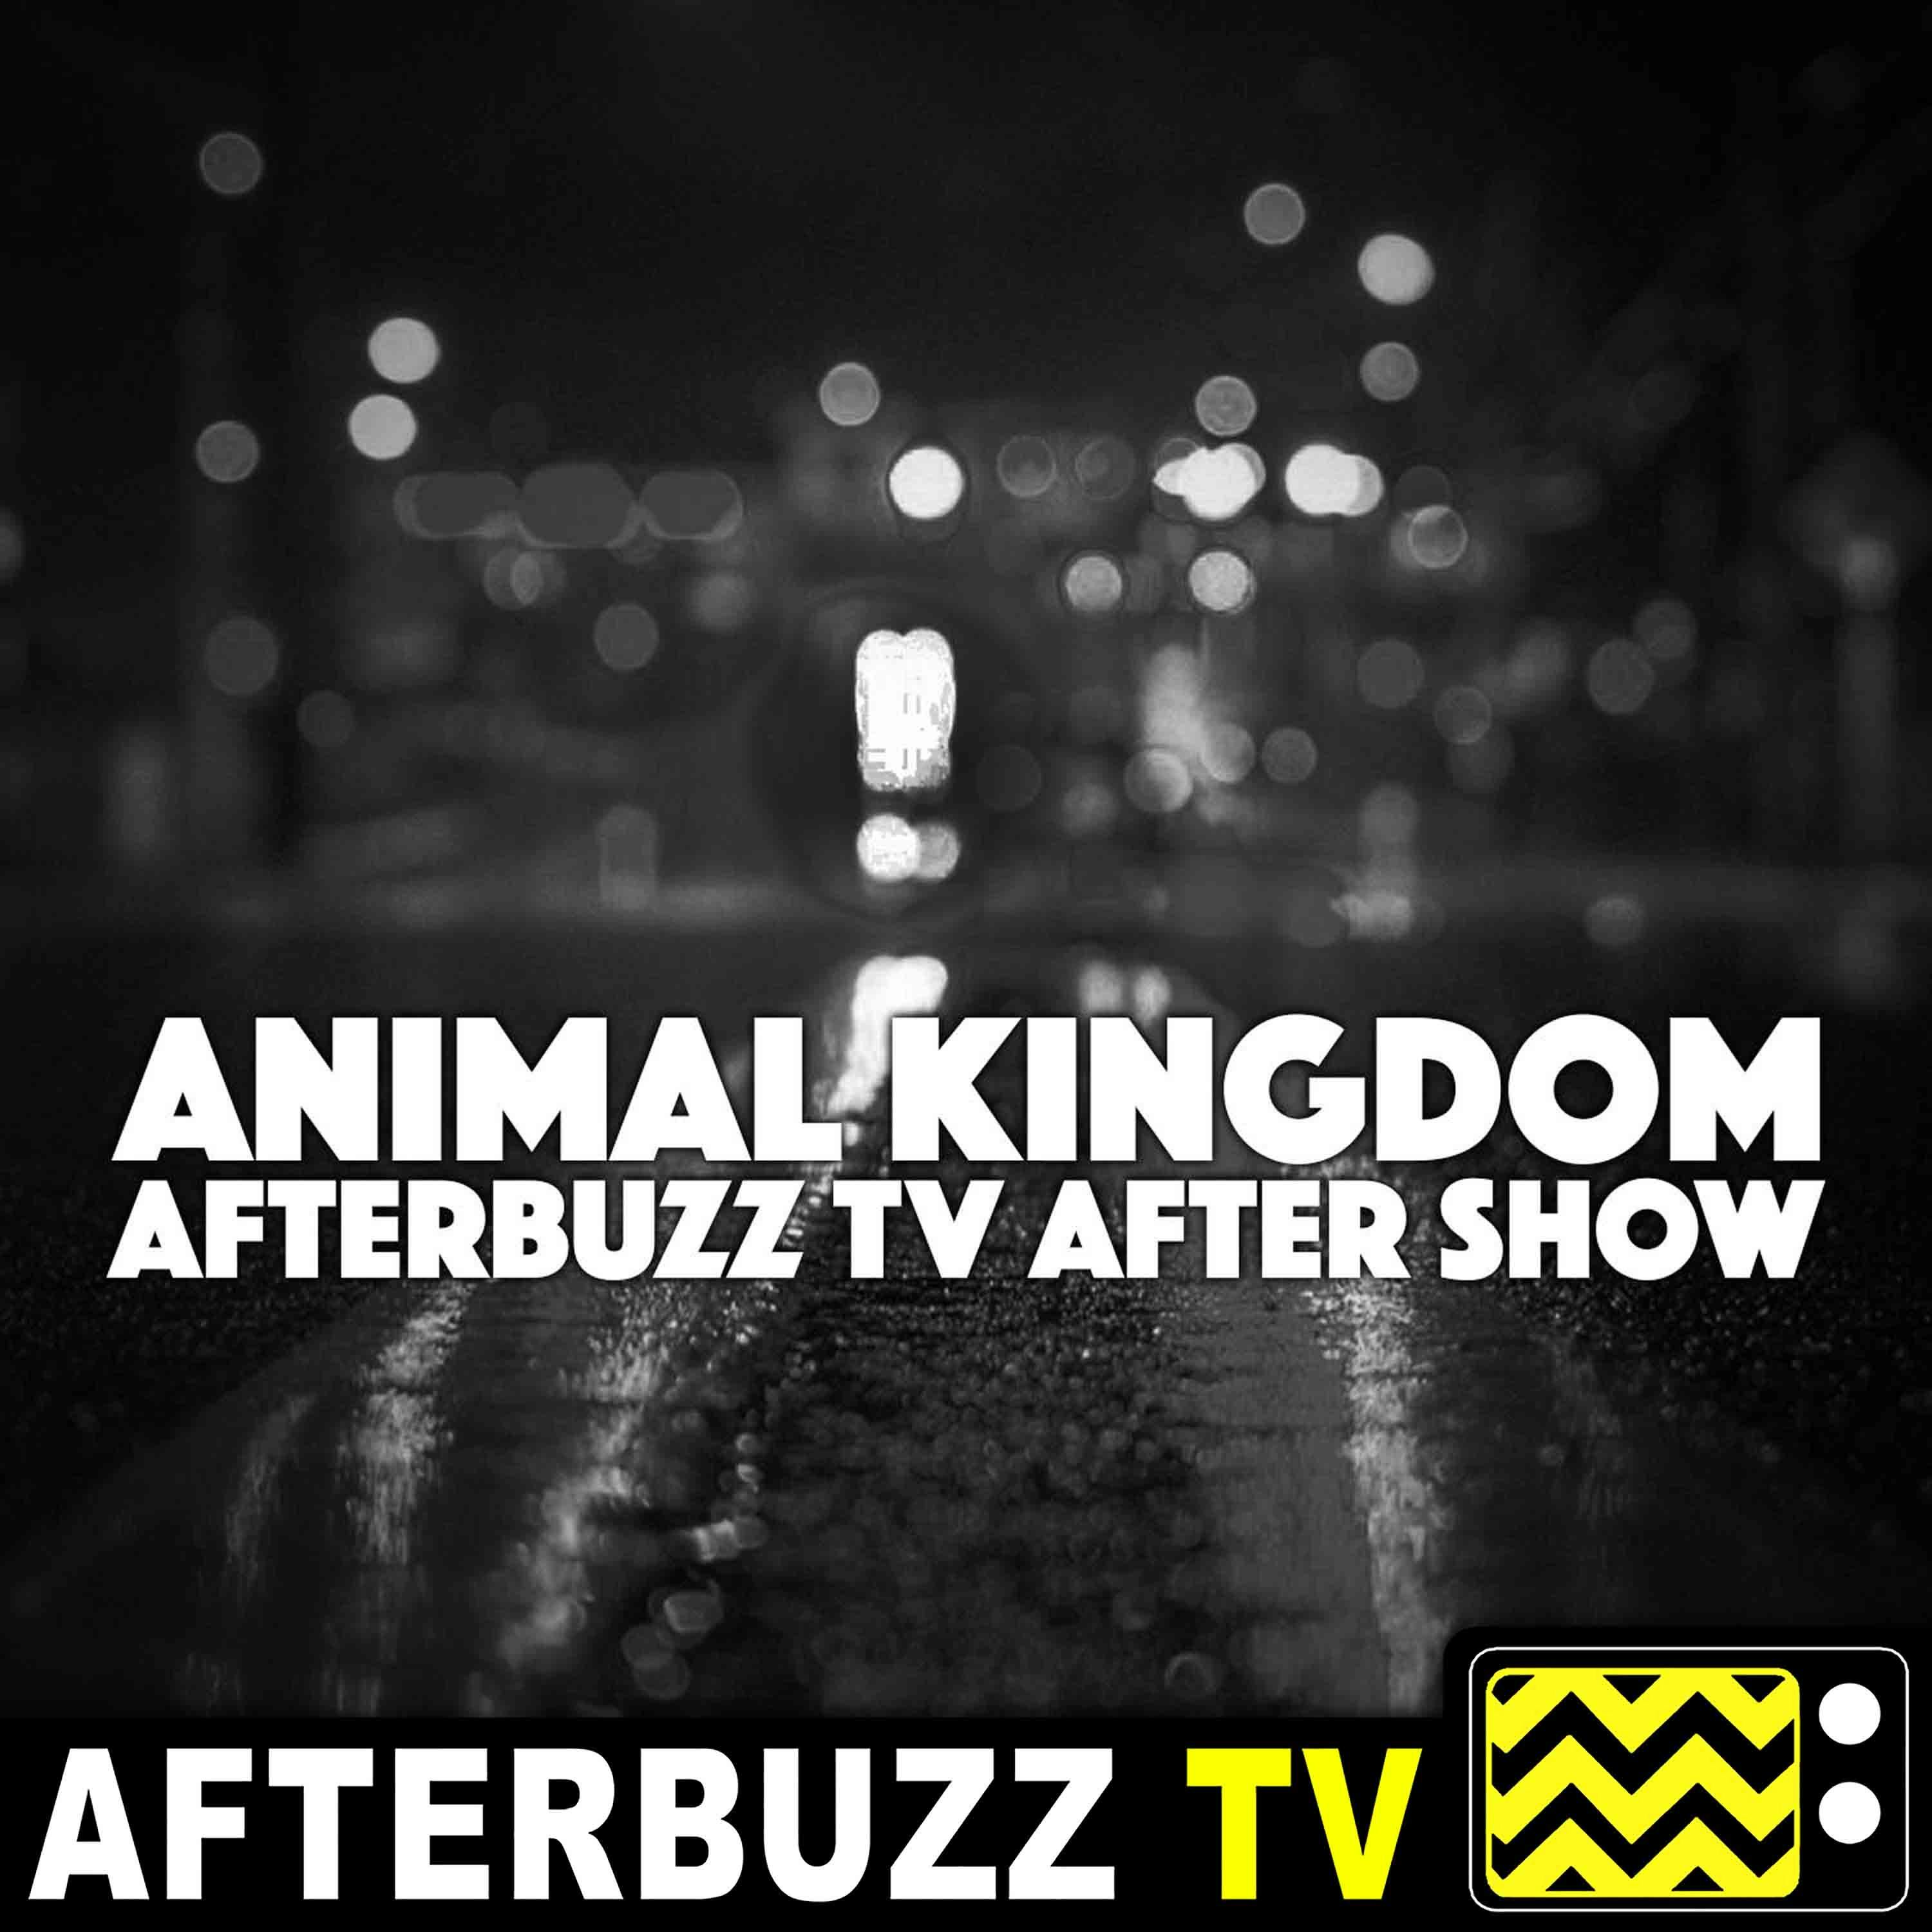 Animal Kingdom S:2 | Olga Aguilar guests on Dig E:7 | AfterBuzz TV AfterShow